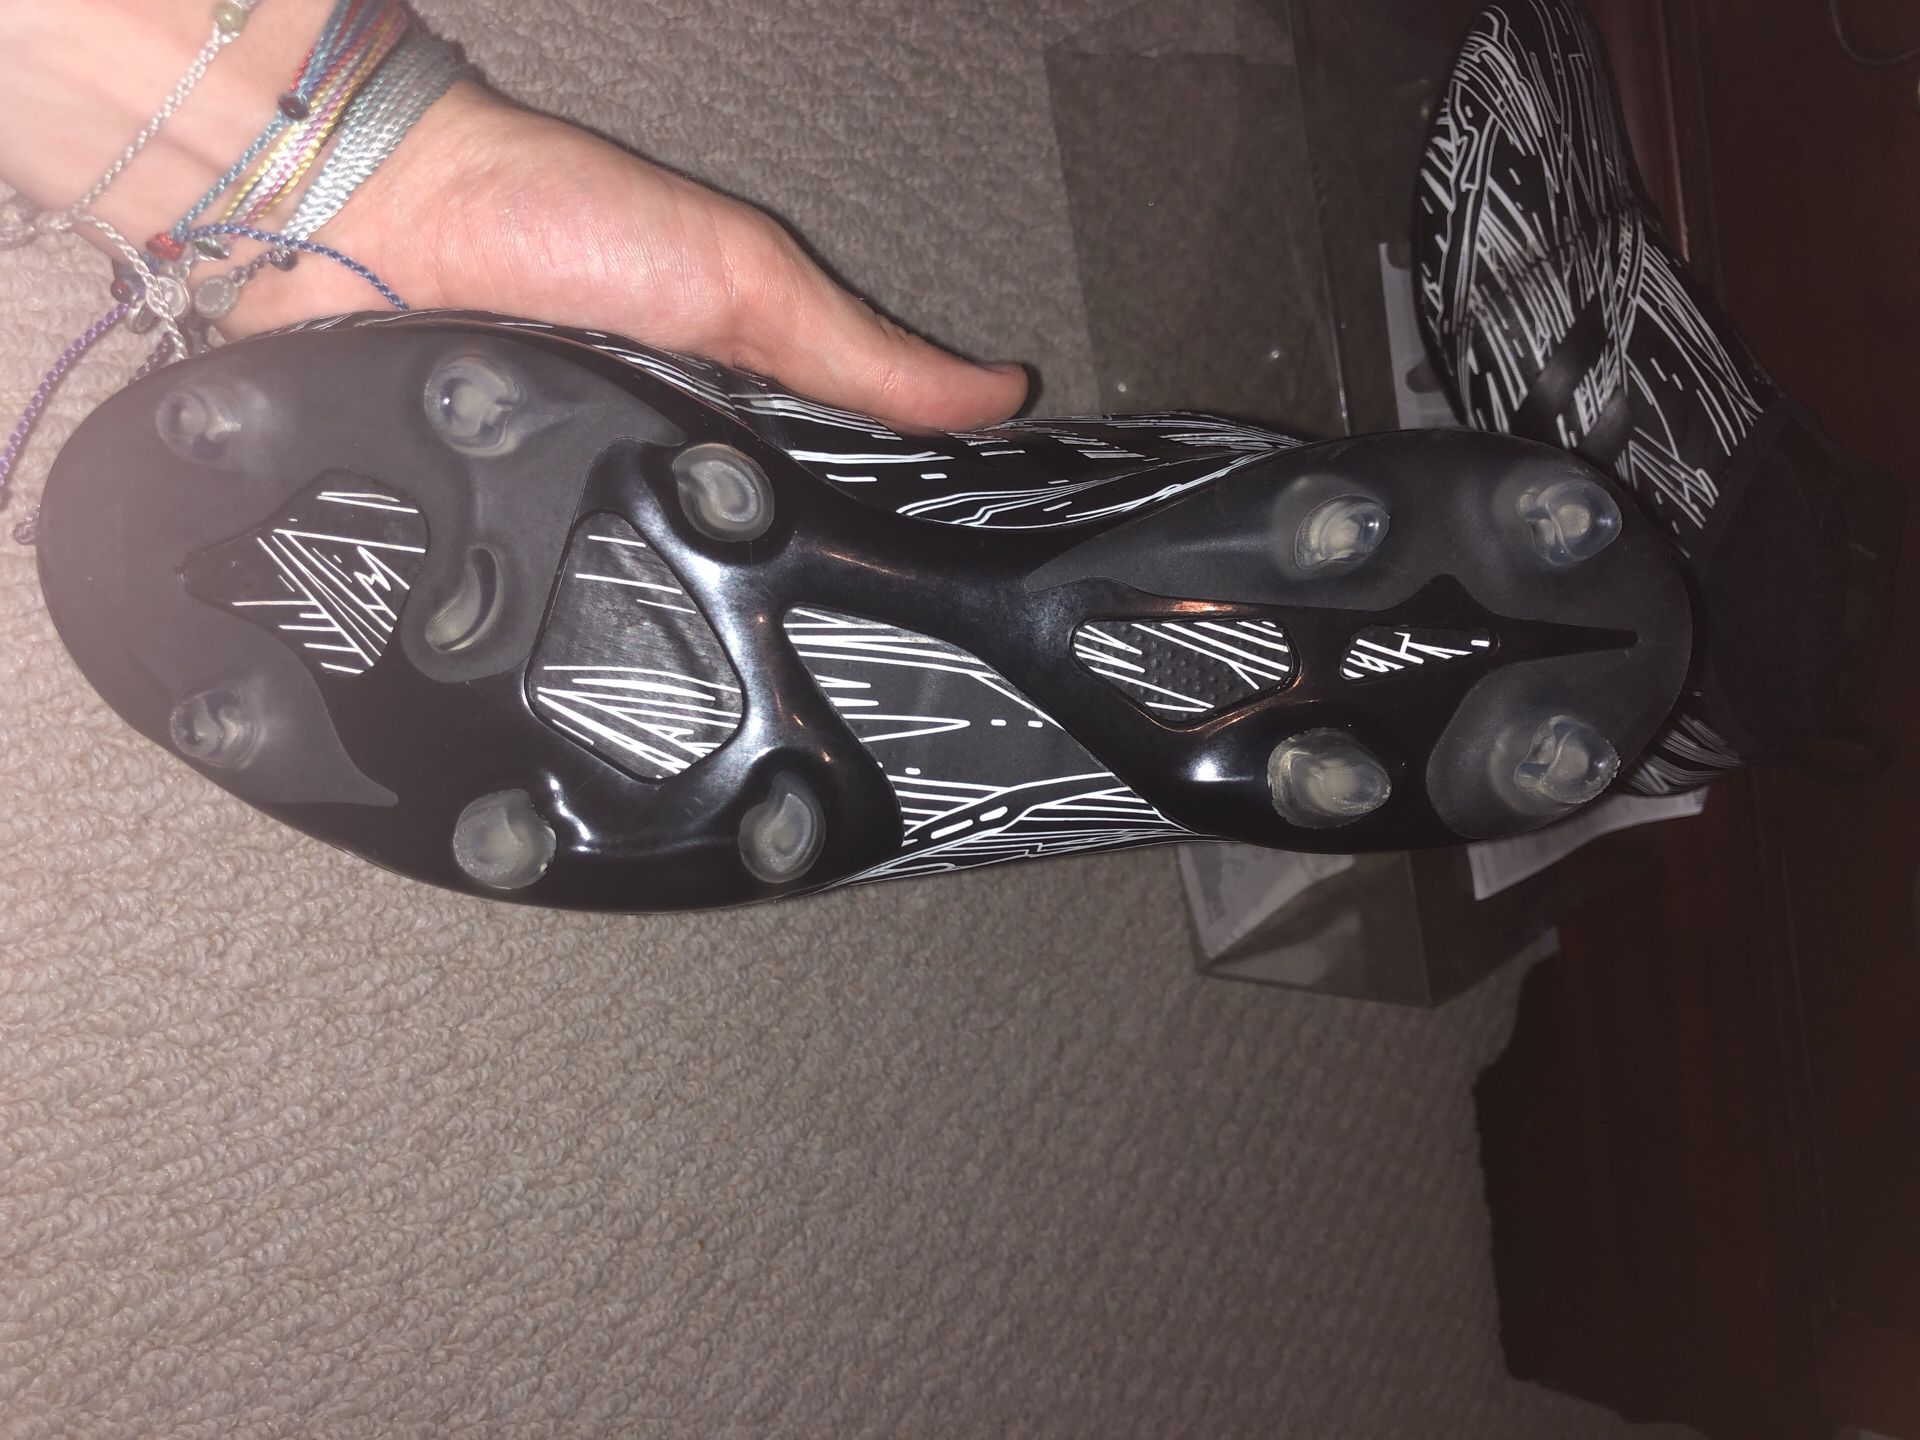 Adidas Glitch Soccer Cleats RARE for Sale in Clayton, NC - OfferUp